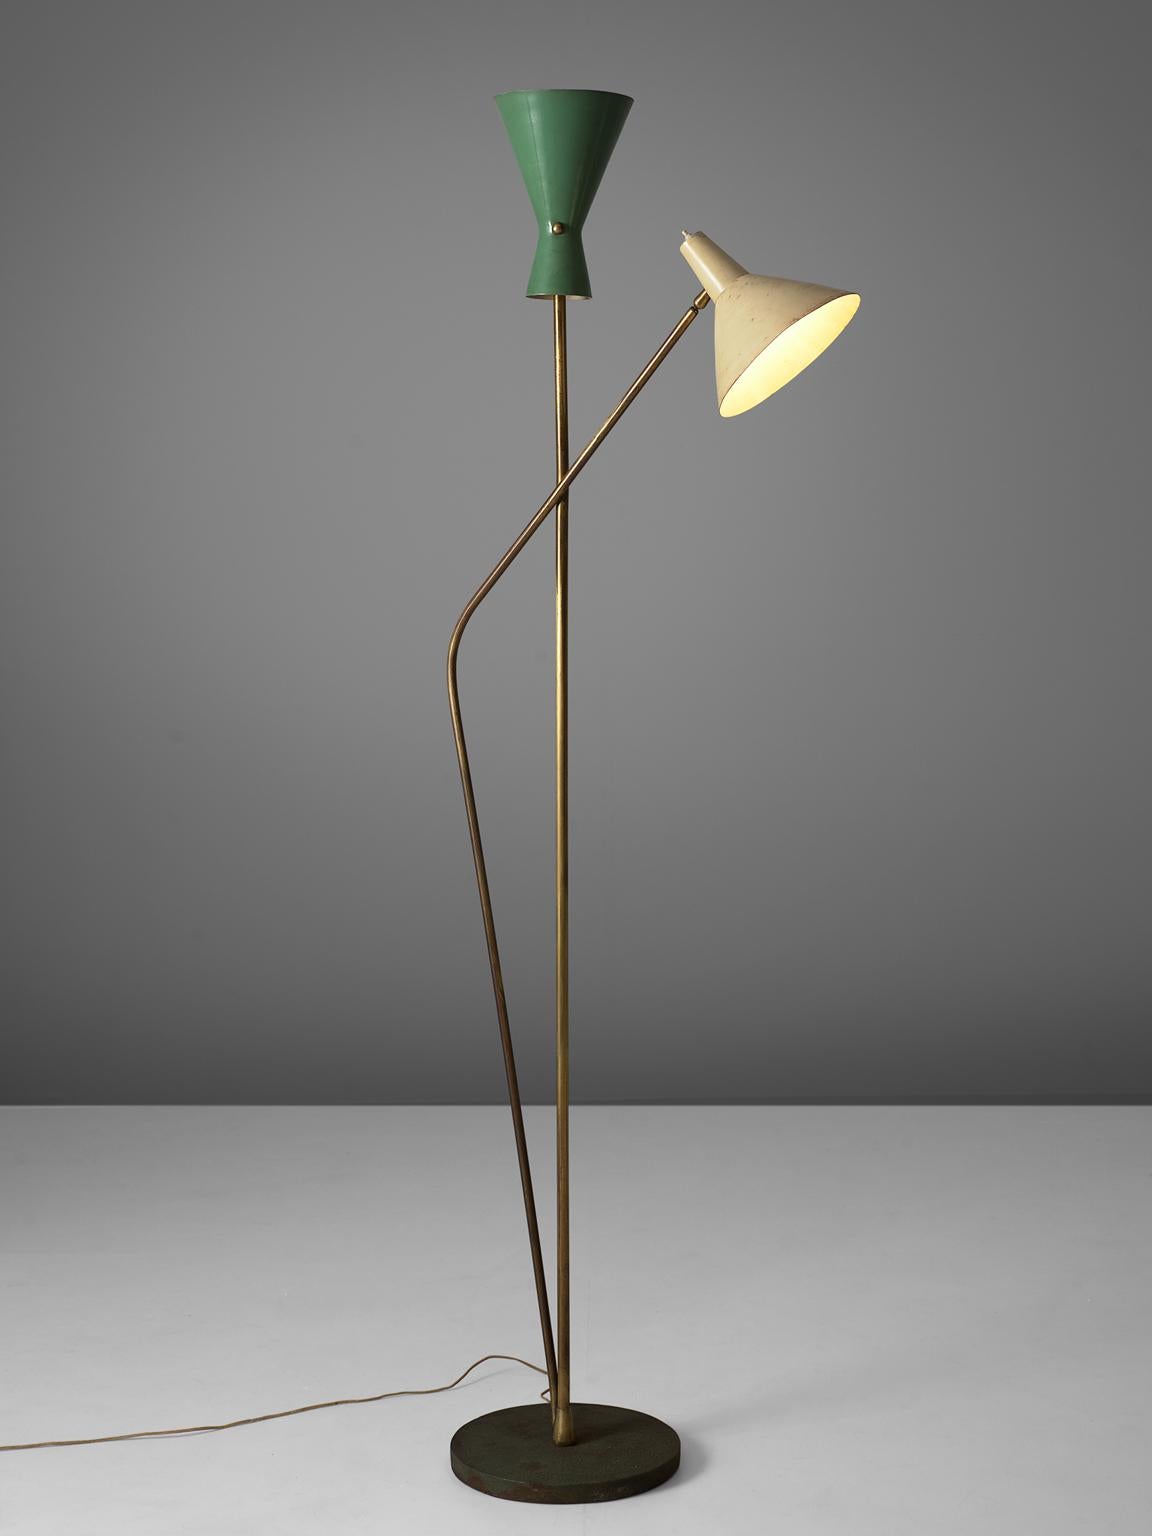 Lumen, two-armed floor lamp, brass and metal, Italy, 1950s.

This floor lamp is built up of one pedestal dark grey metal foot from which two brass stem arises. Each stem each end in a metal shade, one white and one green. The green shade is